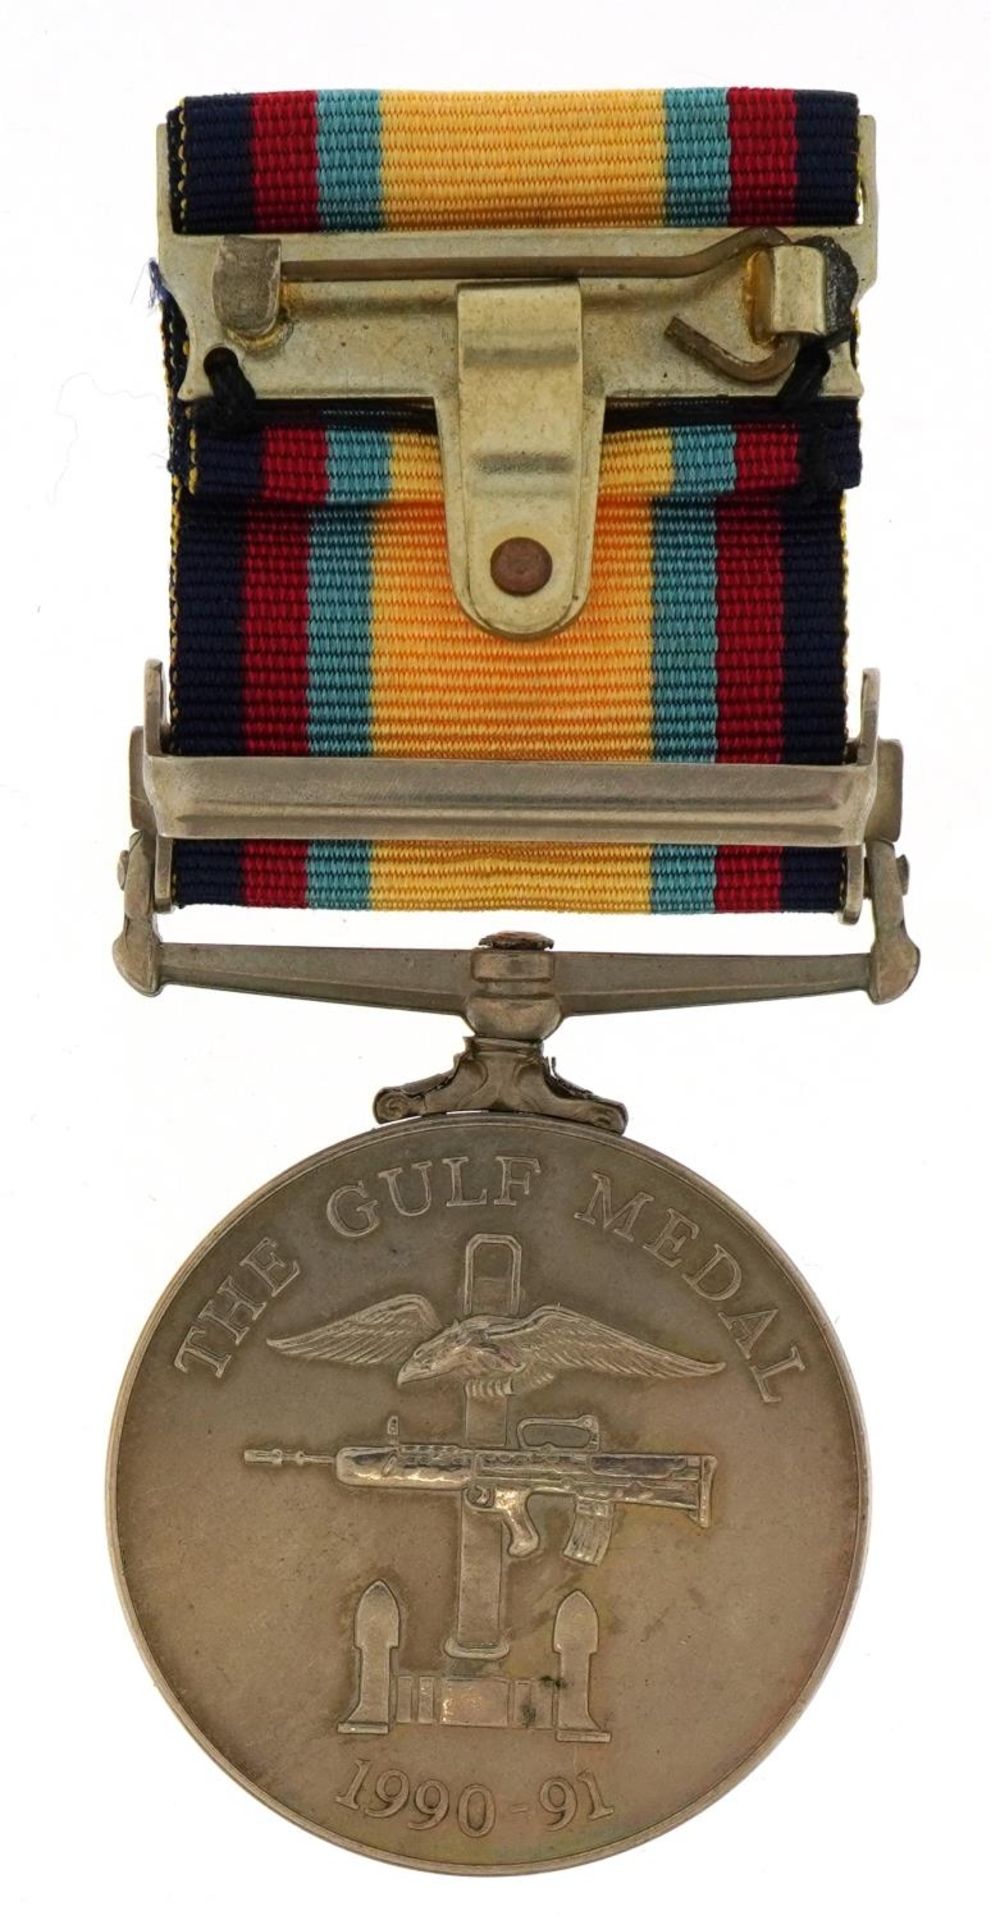 British military Elizabeth II Gulf medal with 16 Jan to 28 Feb 1991 bar awarded to MM4 A A MILEA - Image 3 of 4